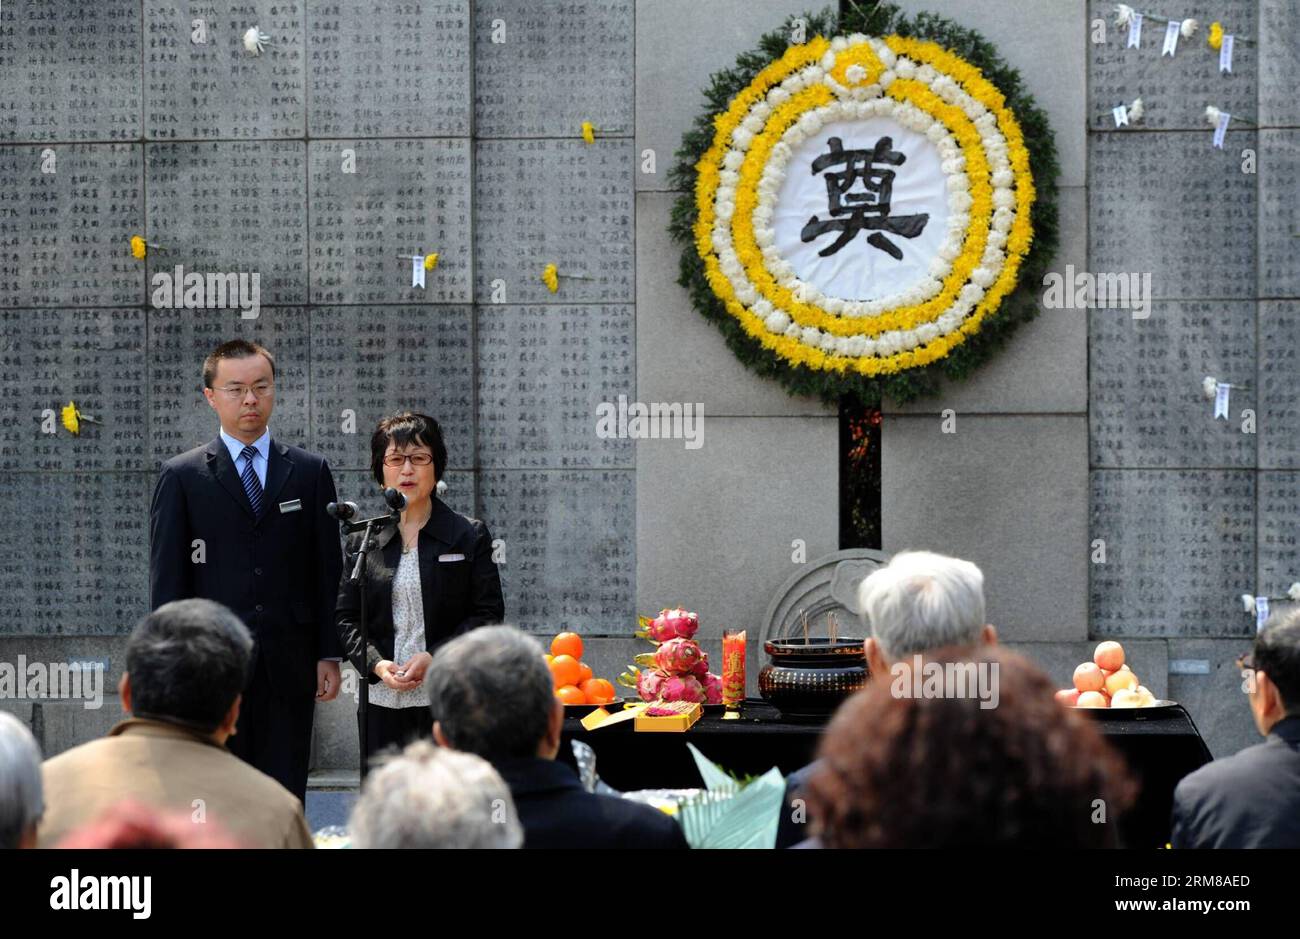 (140405) -- NANJING, April 5, 2014 (Xinhua) -- A Japanese woman (R) attends a memorial ceremony in the Memorial Hall of the Victims in Nanjing Massacre by Japanese Invaders, in Nanjing, capital of east China s Jiangsu Province, April 5, 2014, also the Qingming Festival, or the Tomb-Sweeping Day. Lots of citizens came here to mourn Nanjing Massacre victims on Saturday. (Xinhua/Han Yuqing) (wf) CHINA-NANJING-QINGMING FESTIVAL-NANJING MASSACRE-MEMORIAL CEREMONY (CN) PUBLICATIONxNOTxINxCHN   Nanjing April 5 2014 XINHUA a Japanese Woman r Attends a Memorial Ceremony in The Memorial Hall of The Vict Stock Photo